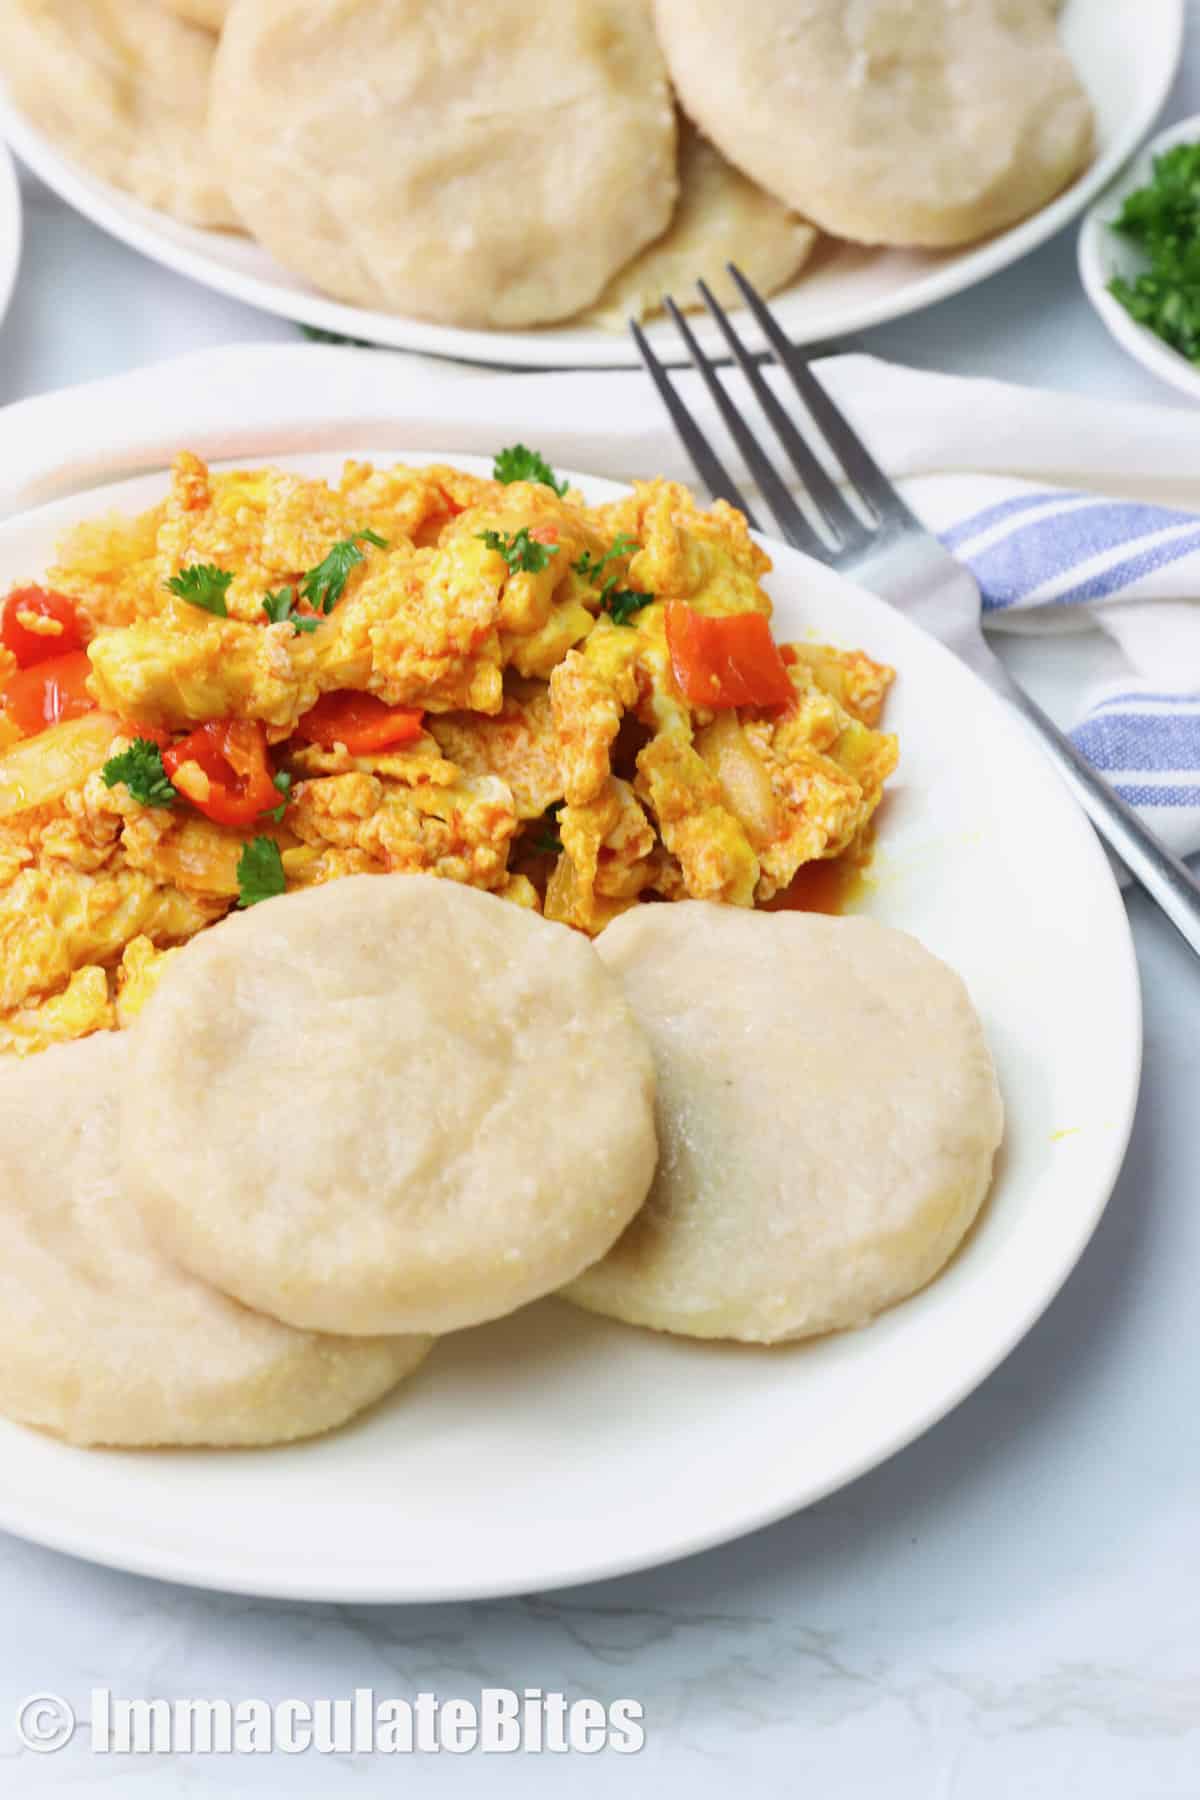 Ackee and saltfish with three Caribbean boiled dumplings